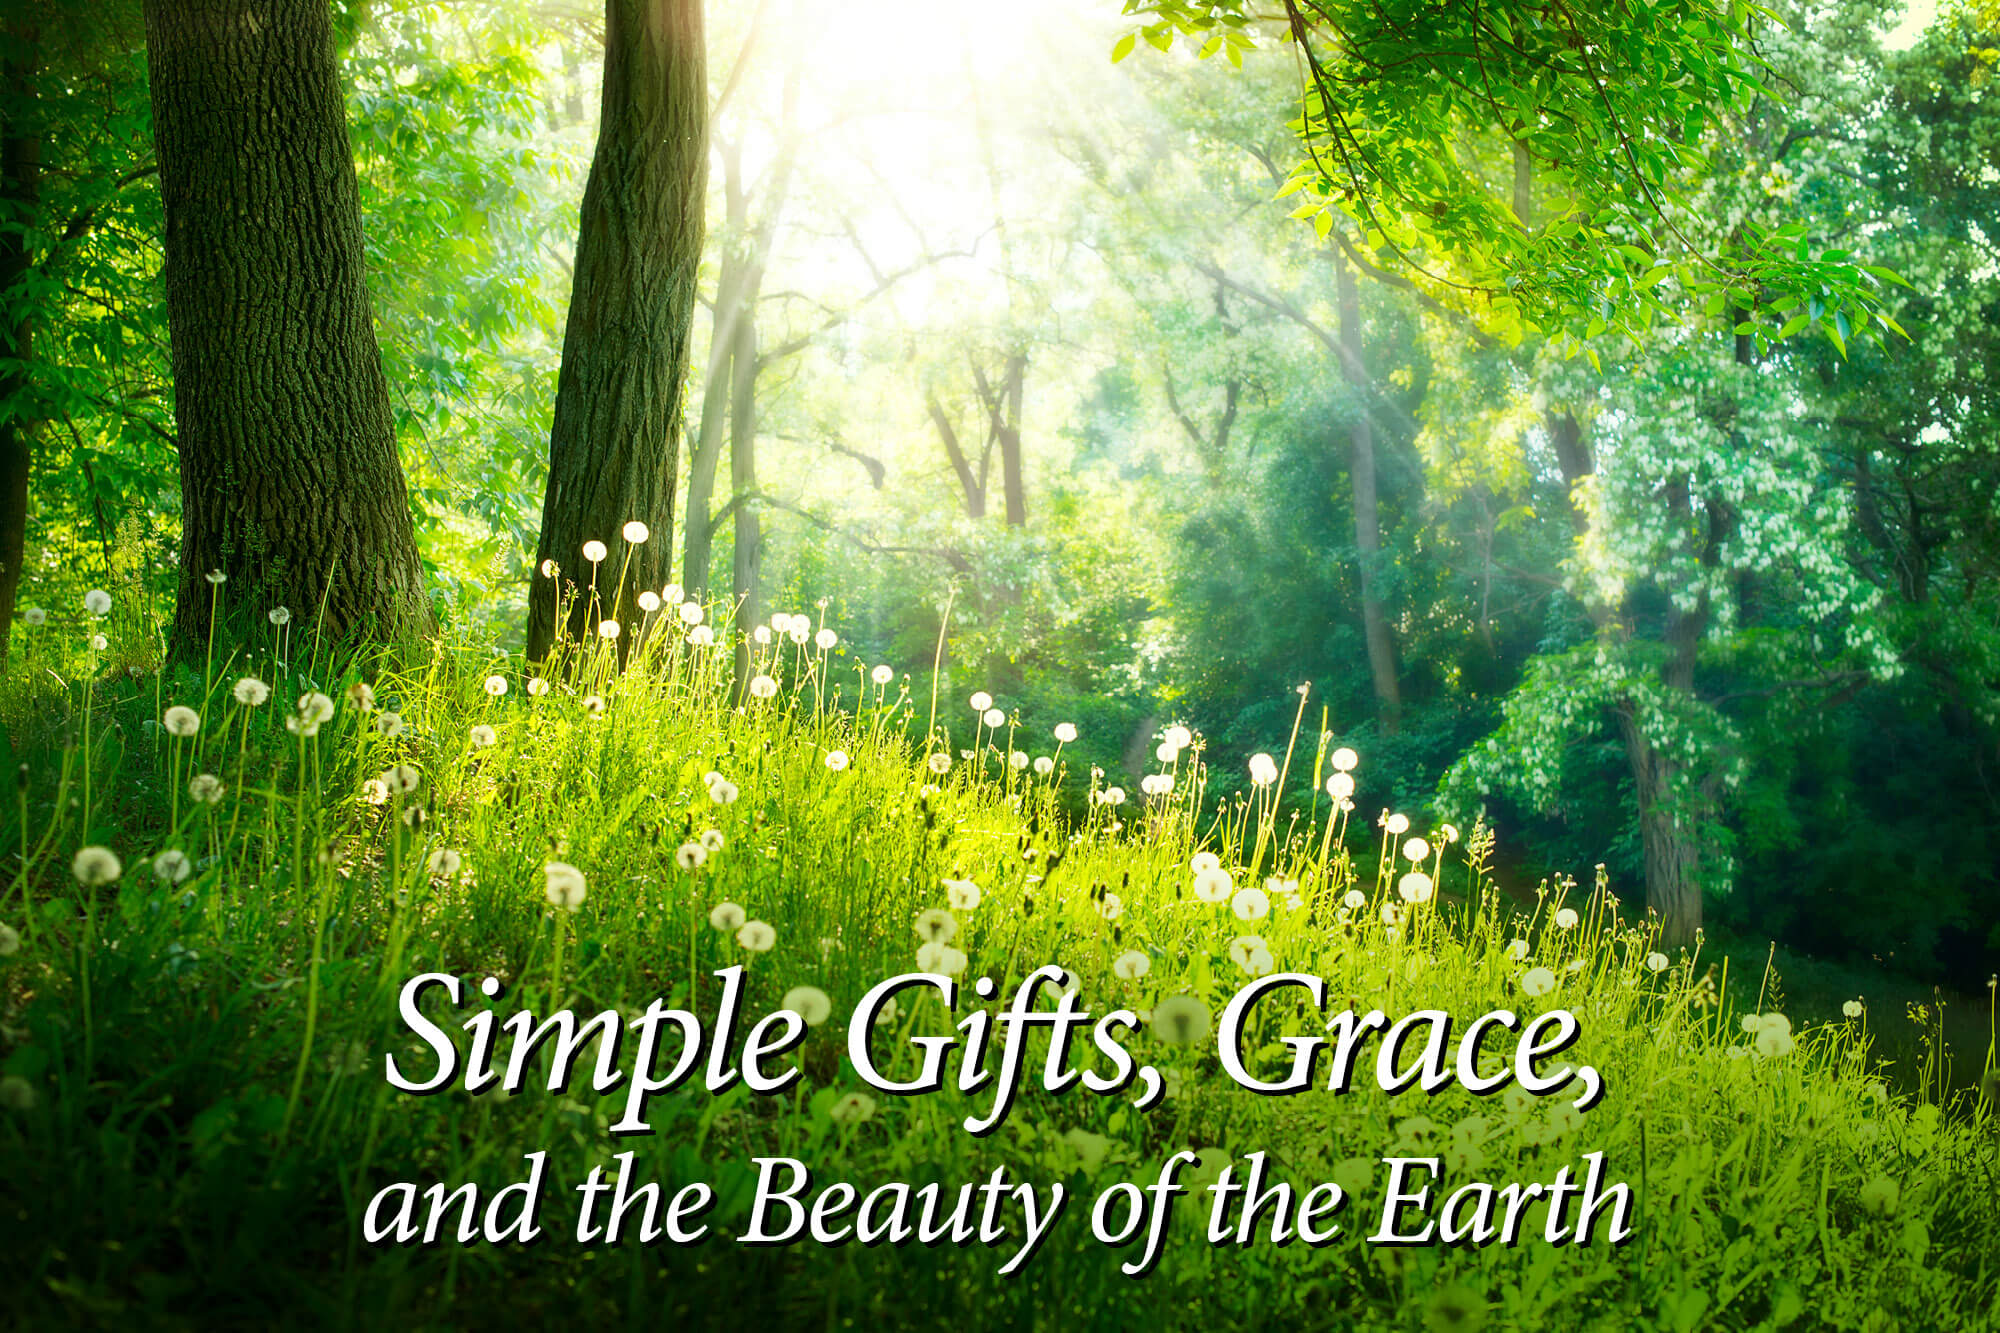 Photograph of trees and grass with the words "Simple Gifts, Grace, and the Beauty of the Earth."